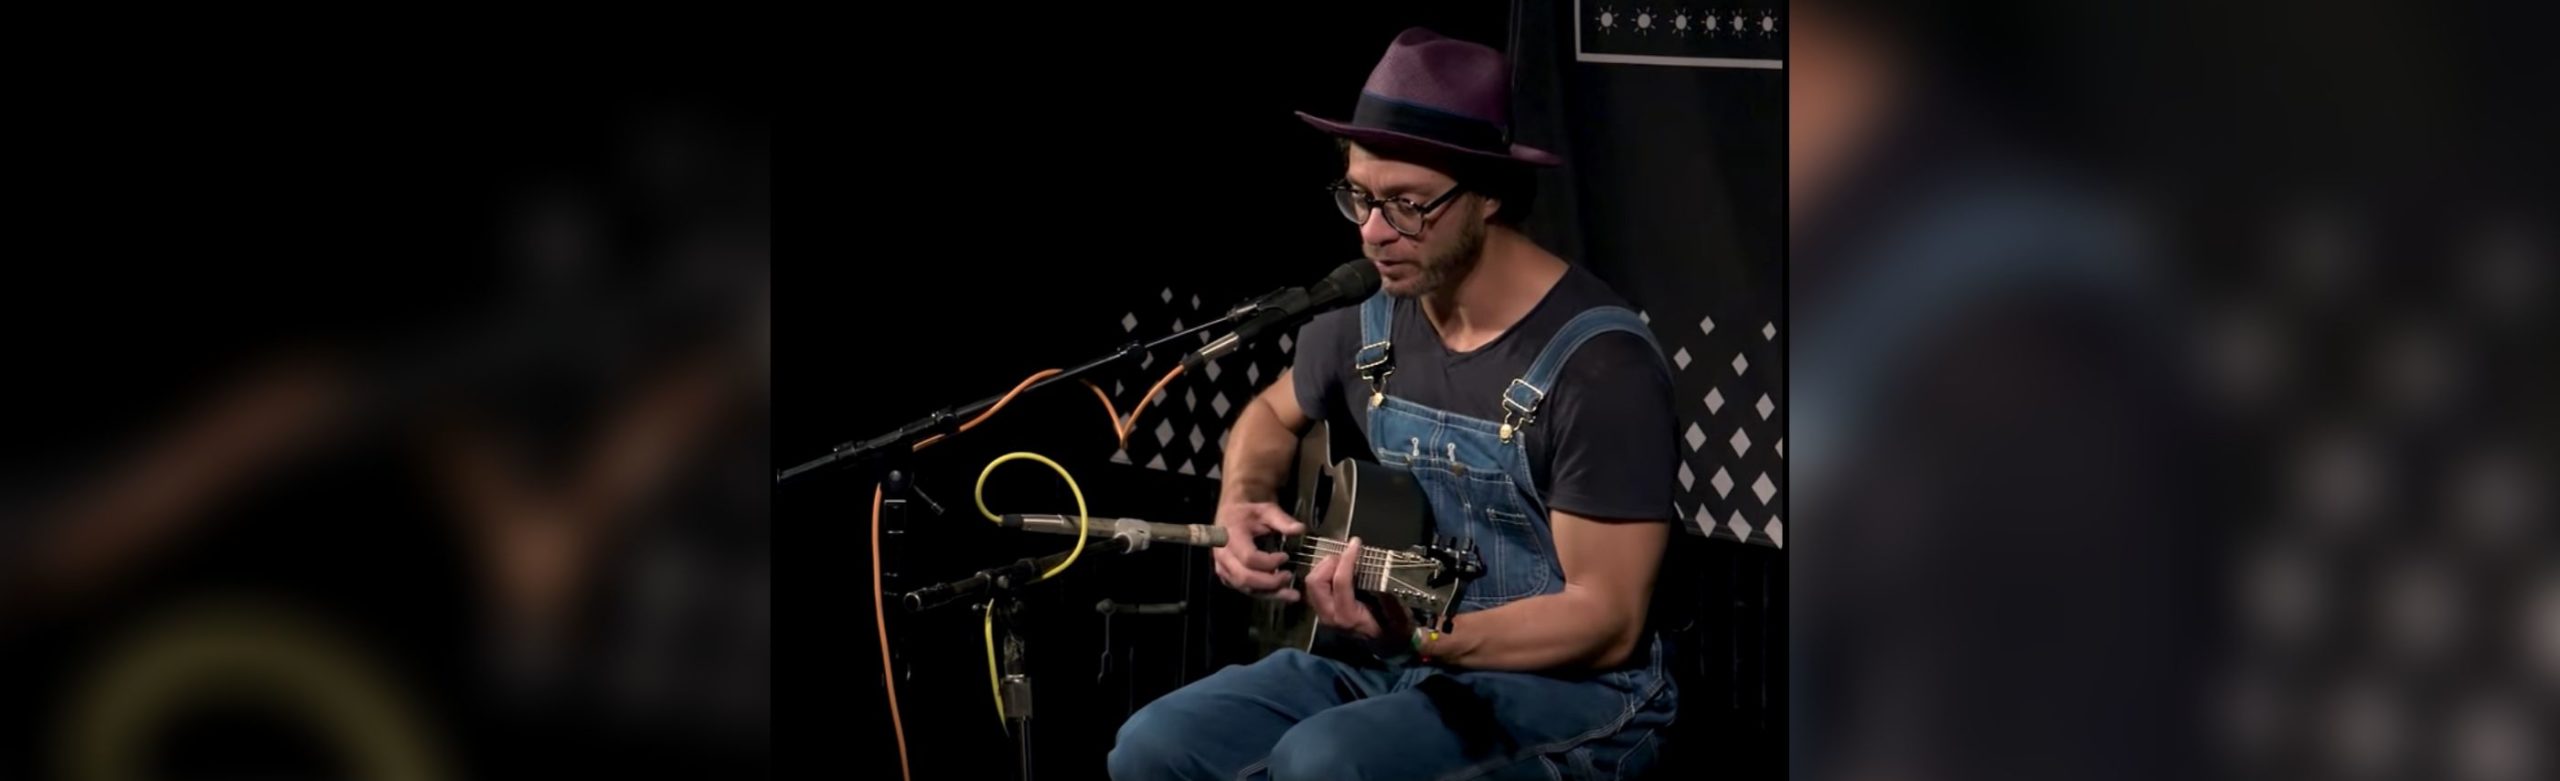 Video Feature: Amos Lee Performs Famed “Sweet Pea” & Others on Austin City Limits Image